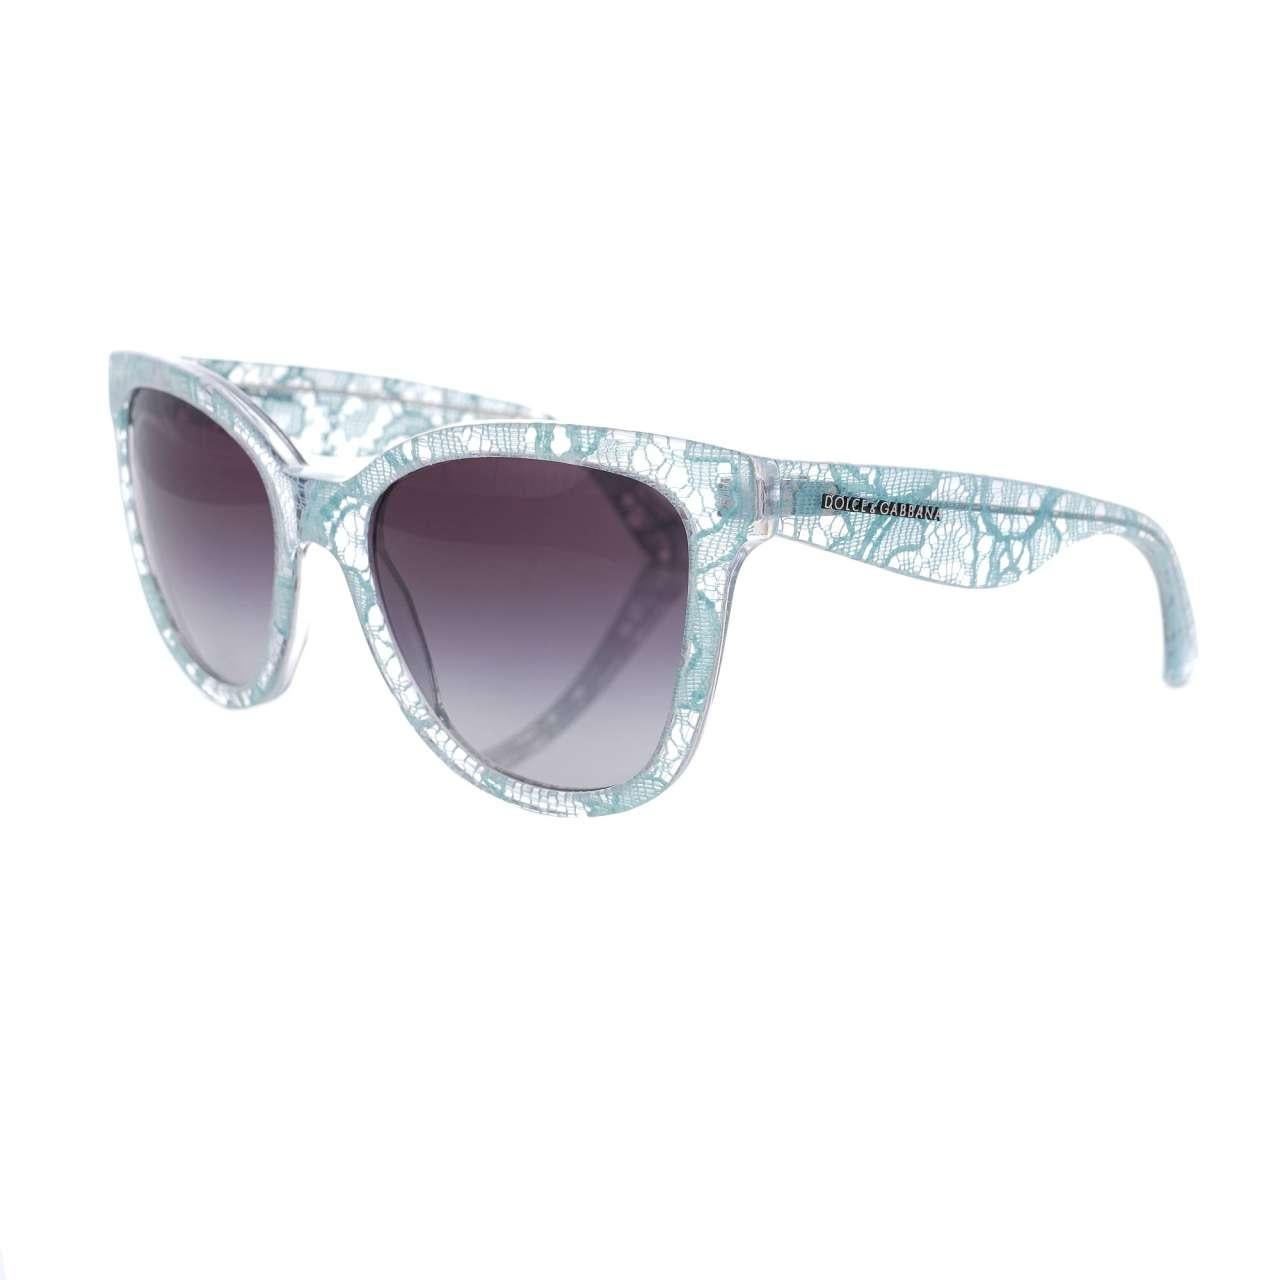 - Sunglasses DG 4190 with Taormina Lace in blue and gray by DOLCE & GABBANA - MADE IN ITALY - New with Case - Model: DG 4190 - Color Frame: Blue - Color Lense: Faded gray - Material Frame: 100% Acetat - 100% UV protection - Size lens / bridge /